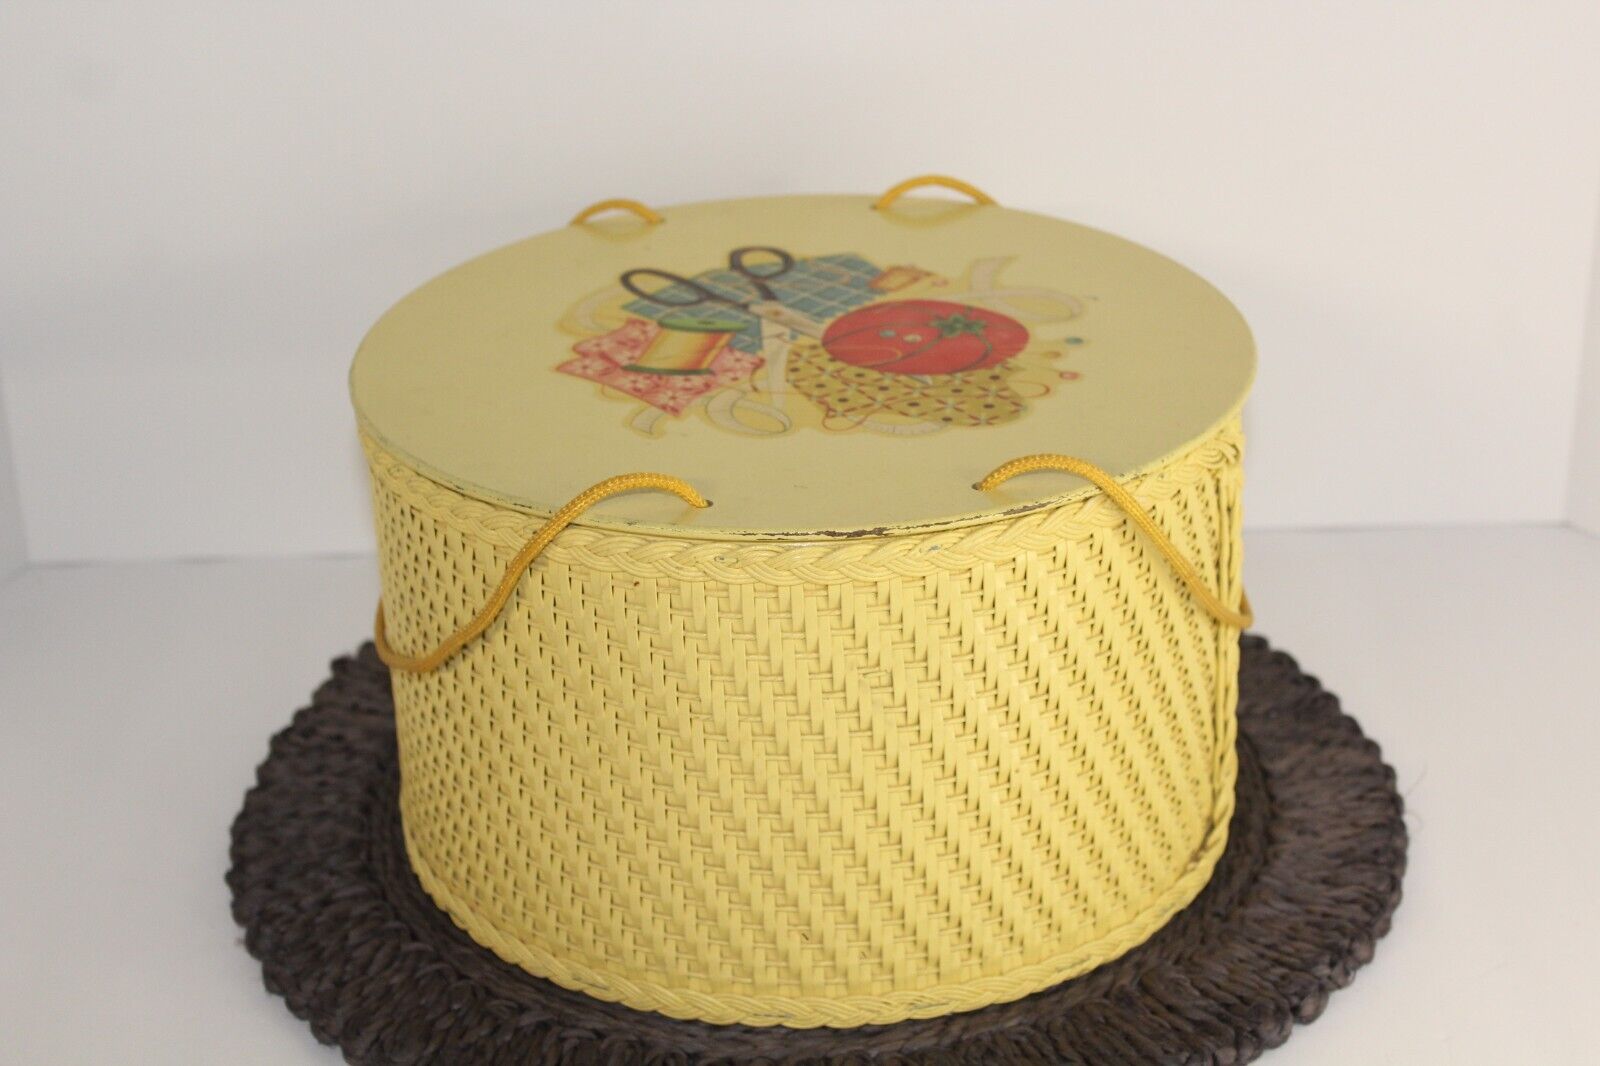 Vintage 1940s Princess Sewing Basket Round Wicker Clean with Decals Yellow